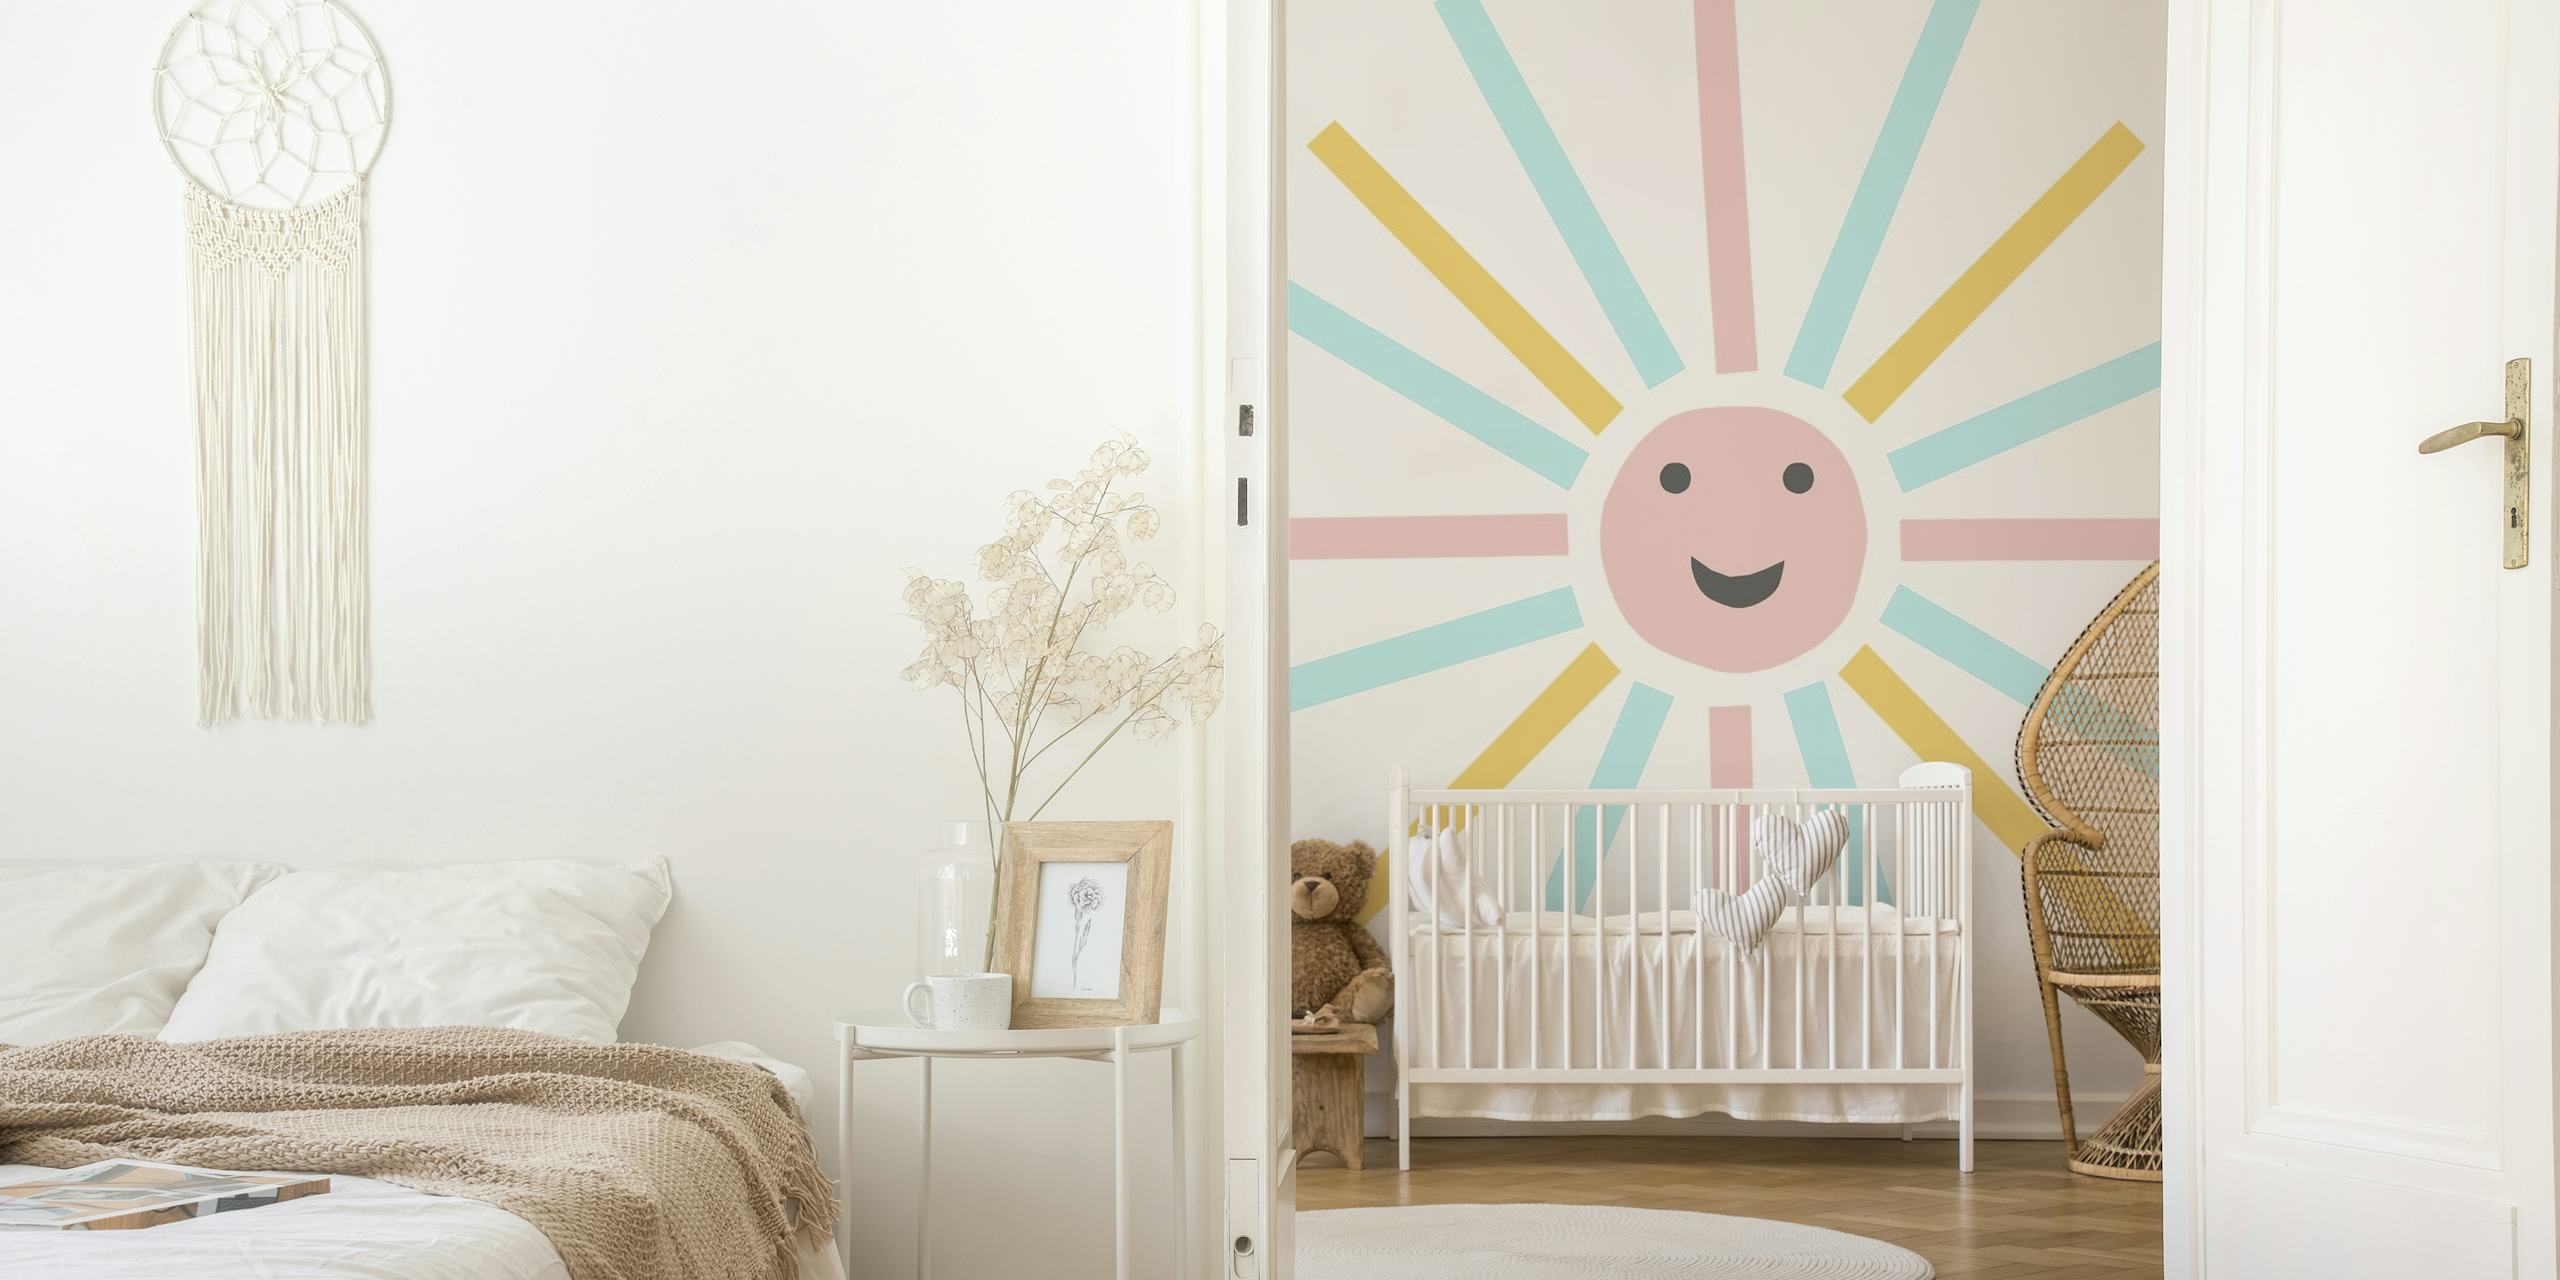 Cheerful retro-style sunburst wall mural with pastel pink, blue, and yellow rays and a smiling sun face in the center